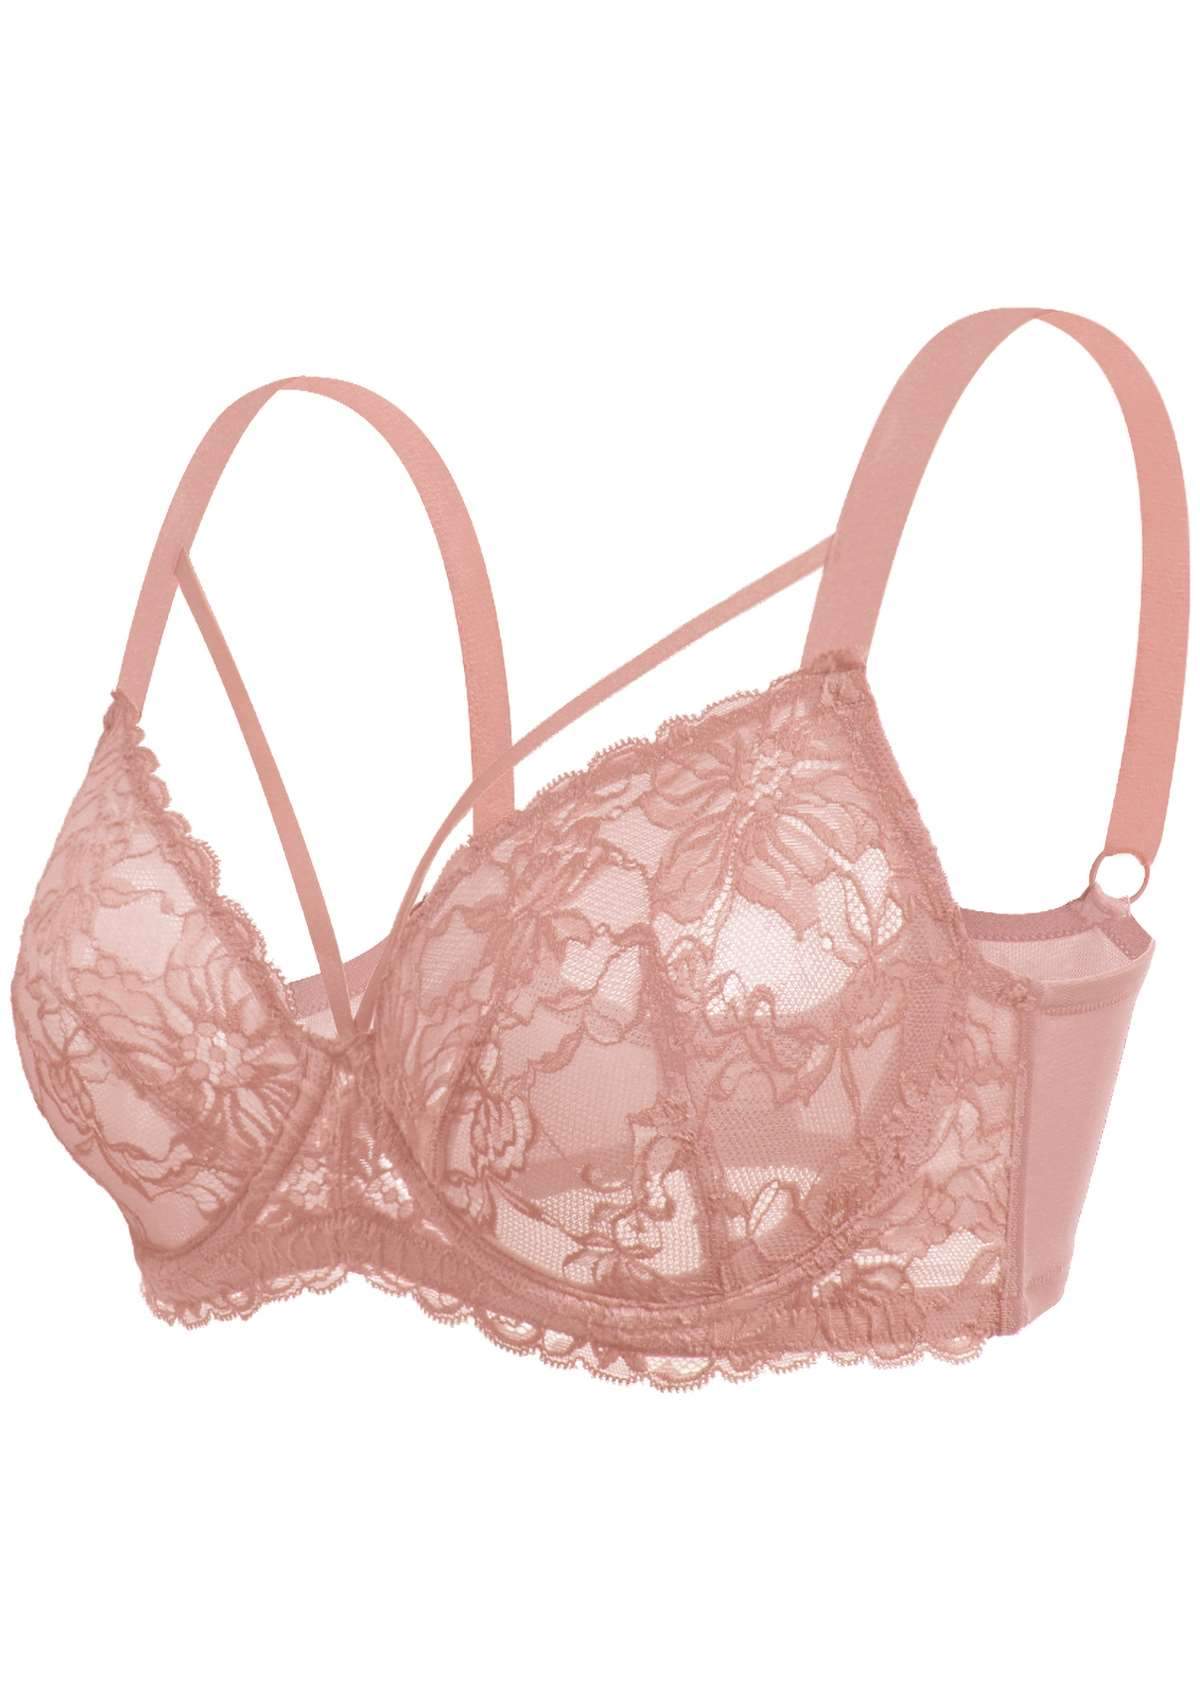 HSIA Pretty In Petals Lace Bra And Panty Sets: Bra For Big Boobs - Light Coral / 38 / C